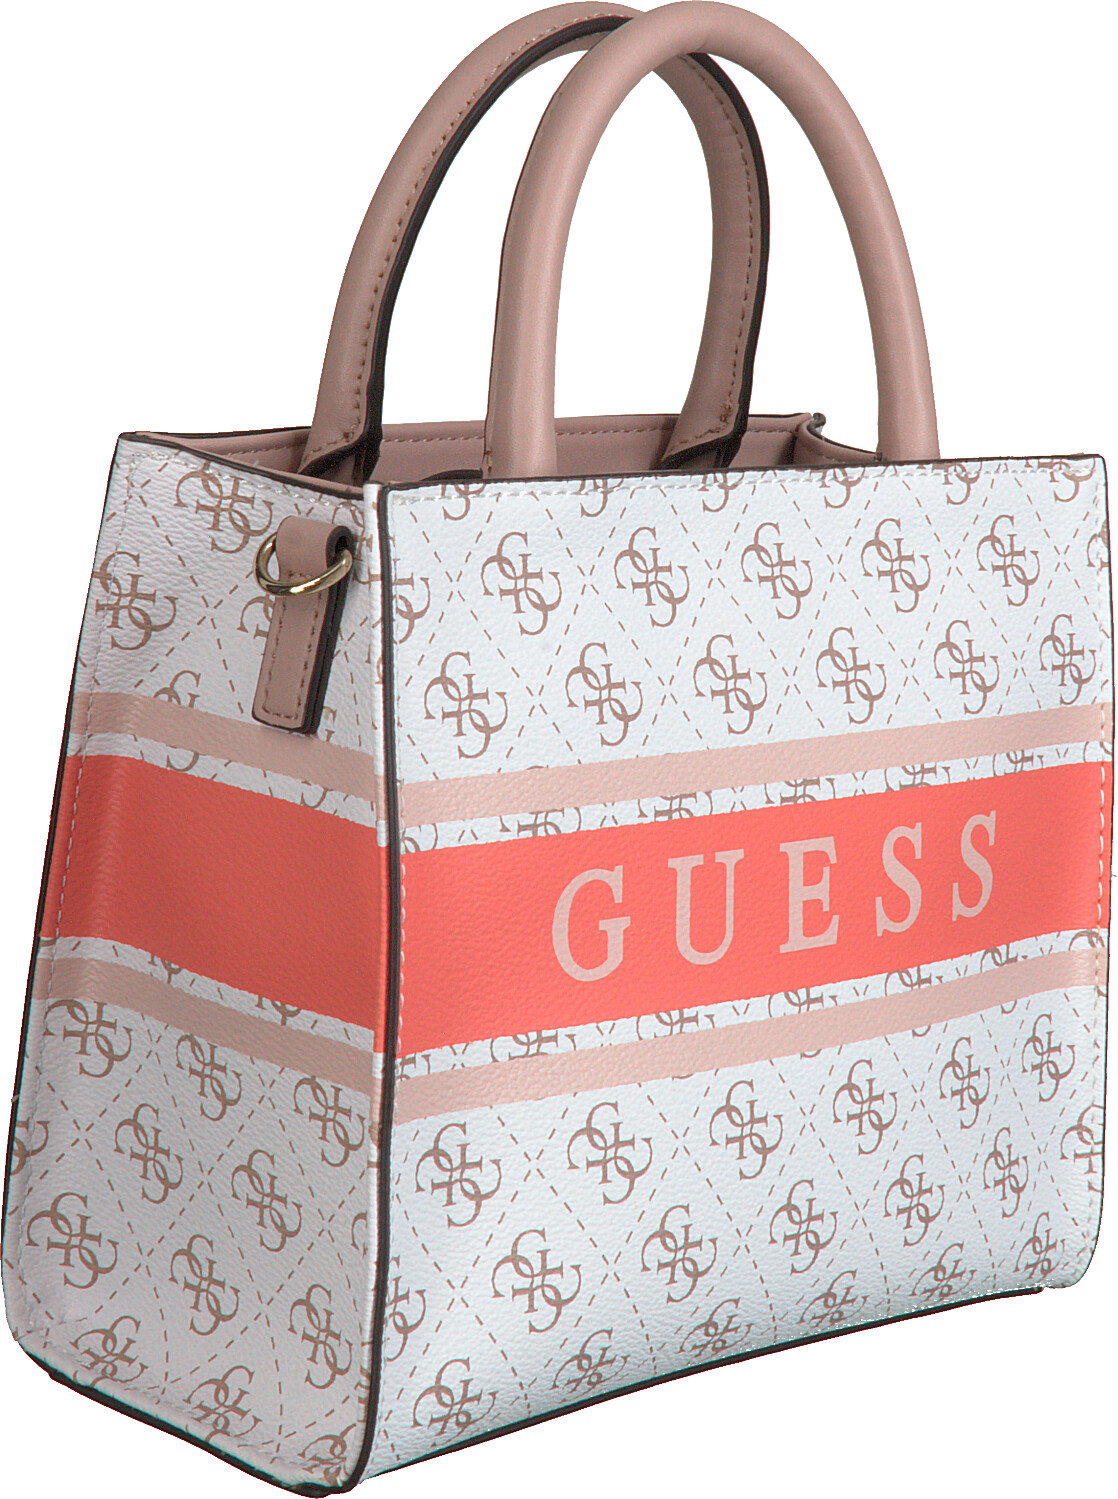 Guess Bags And Purses